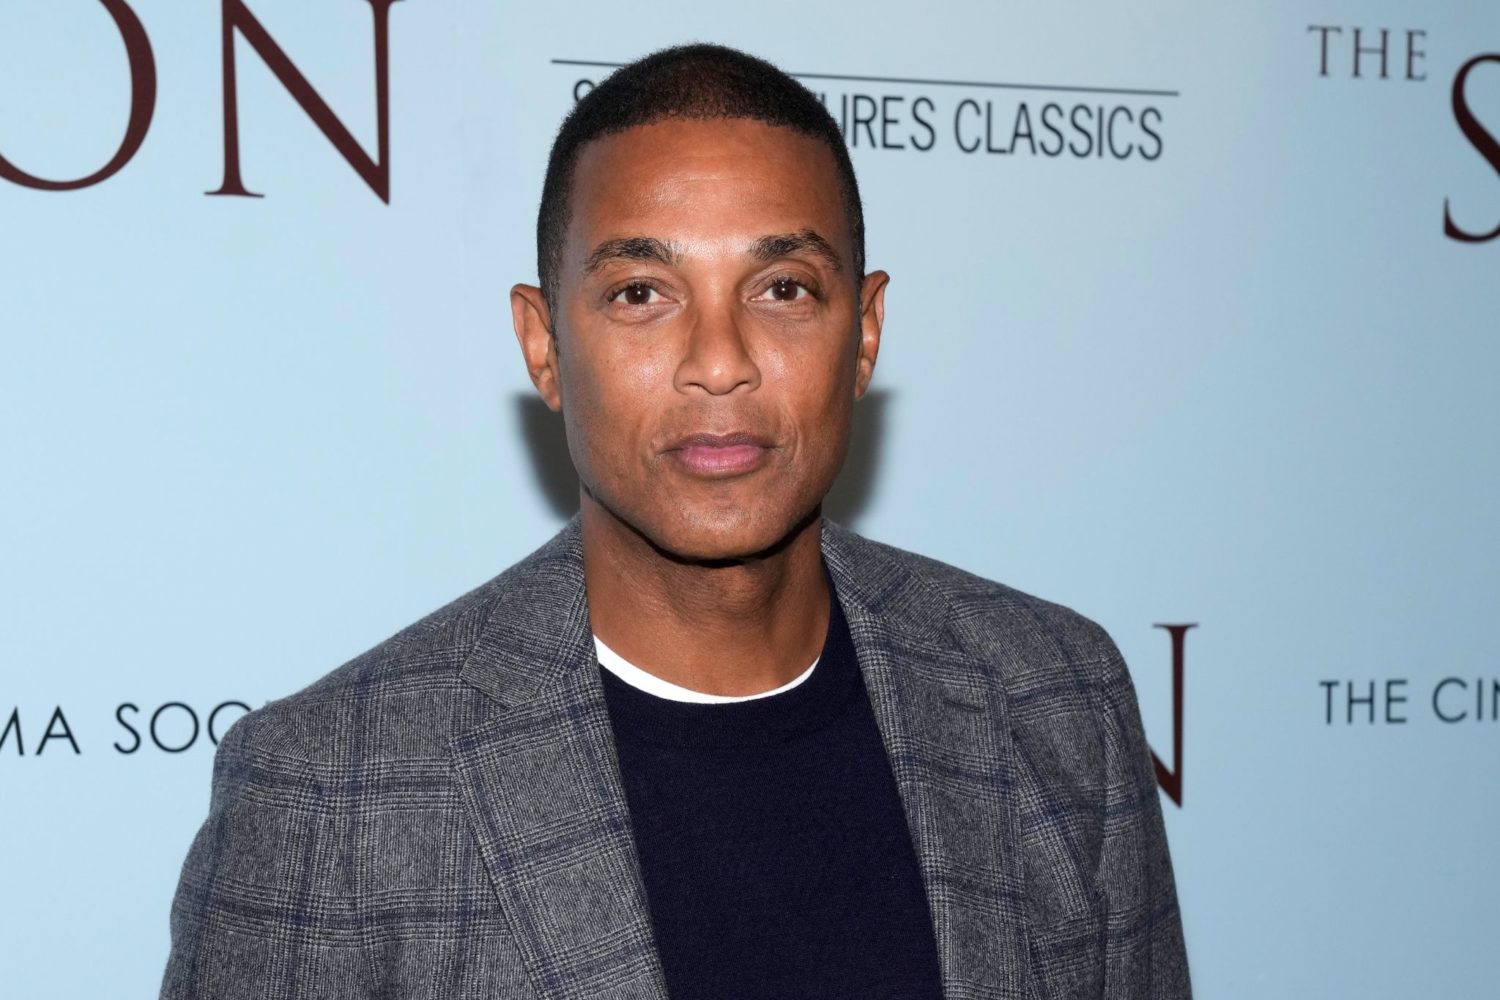 Don Lemon shows skills in a testy interview about Trump’s controversial ...